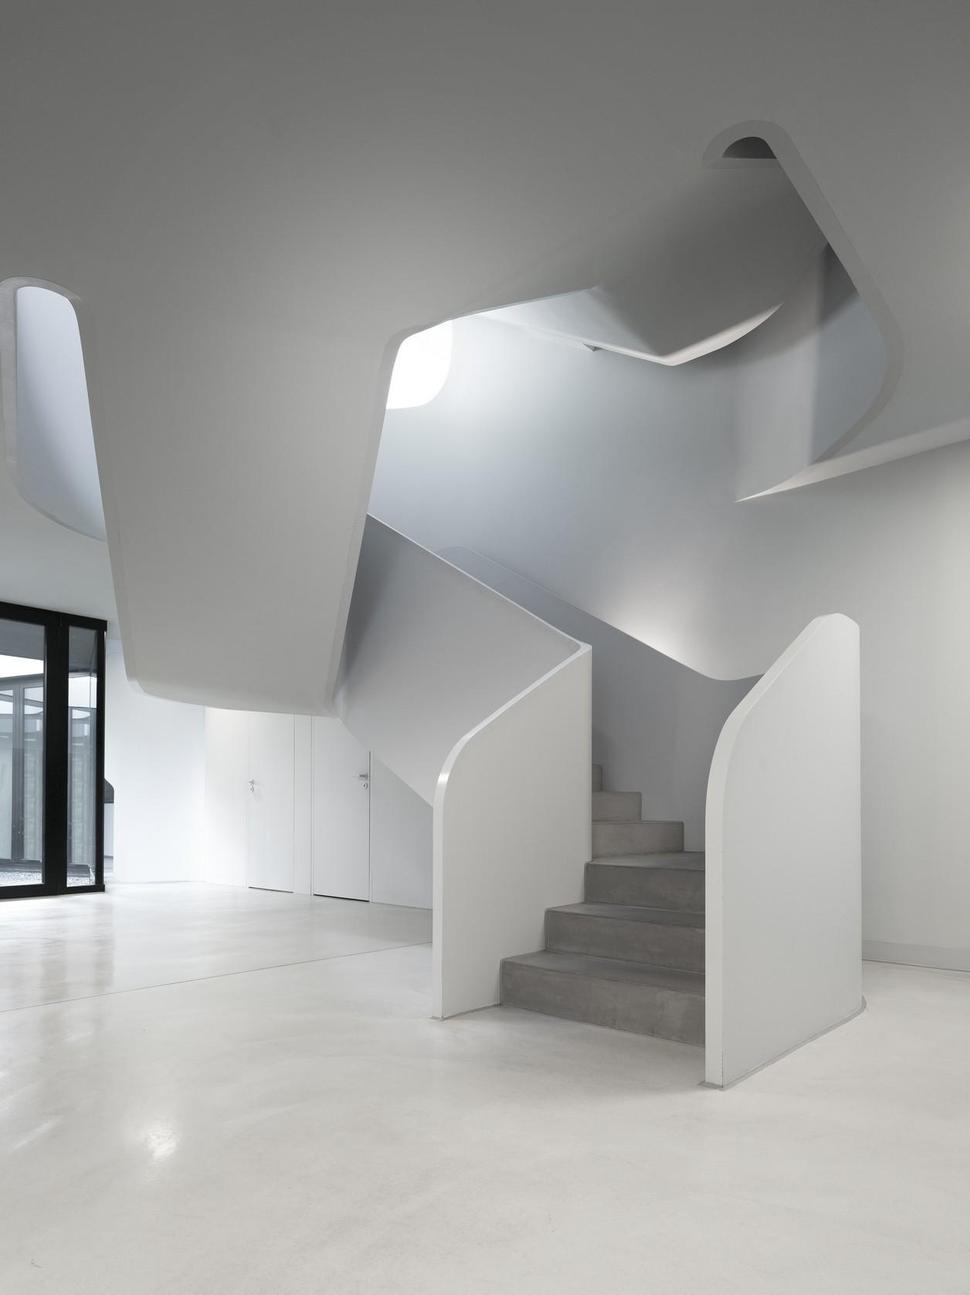 angular-modern-home-features-large-curvaceous-stairwell-inside-6-foyer.jpg